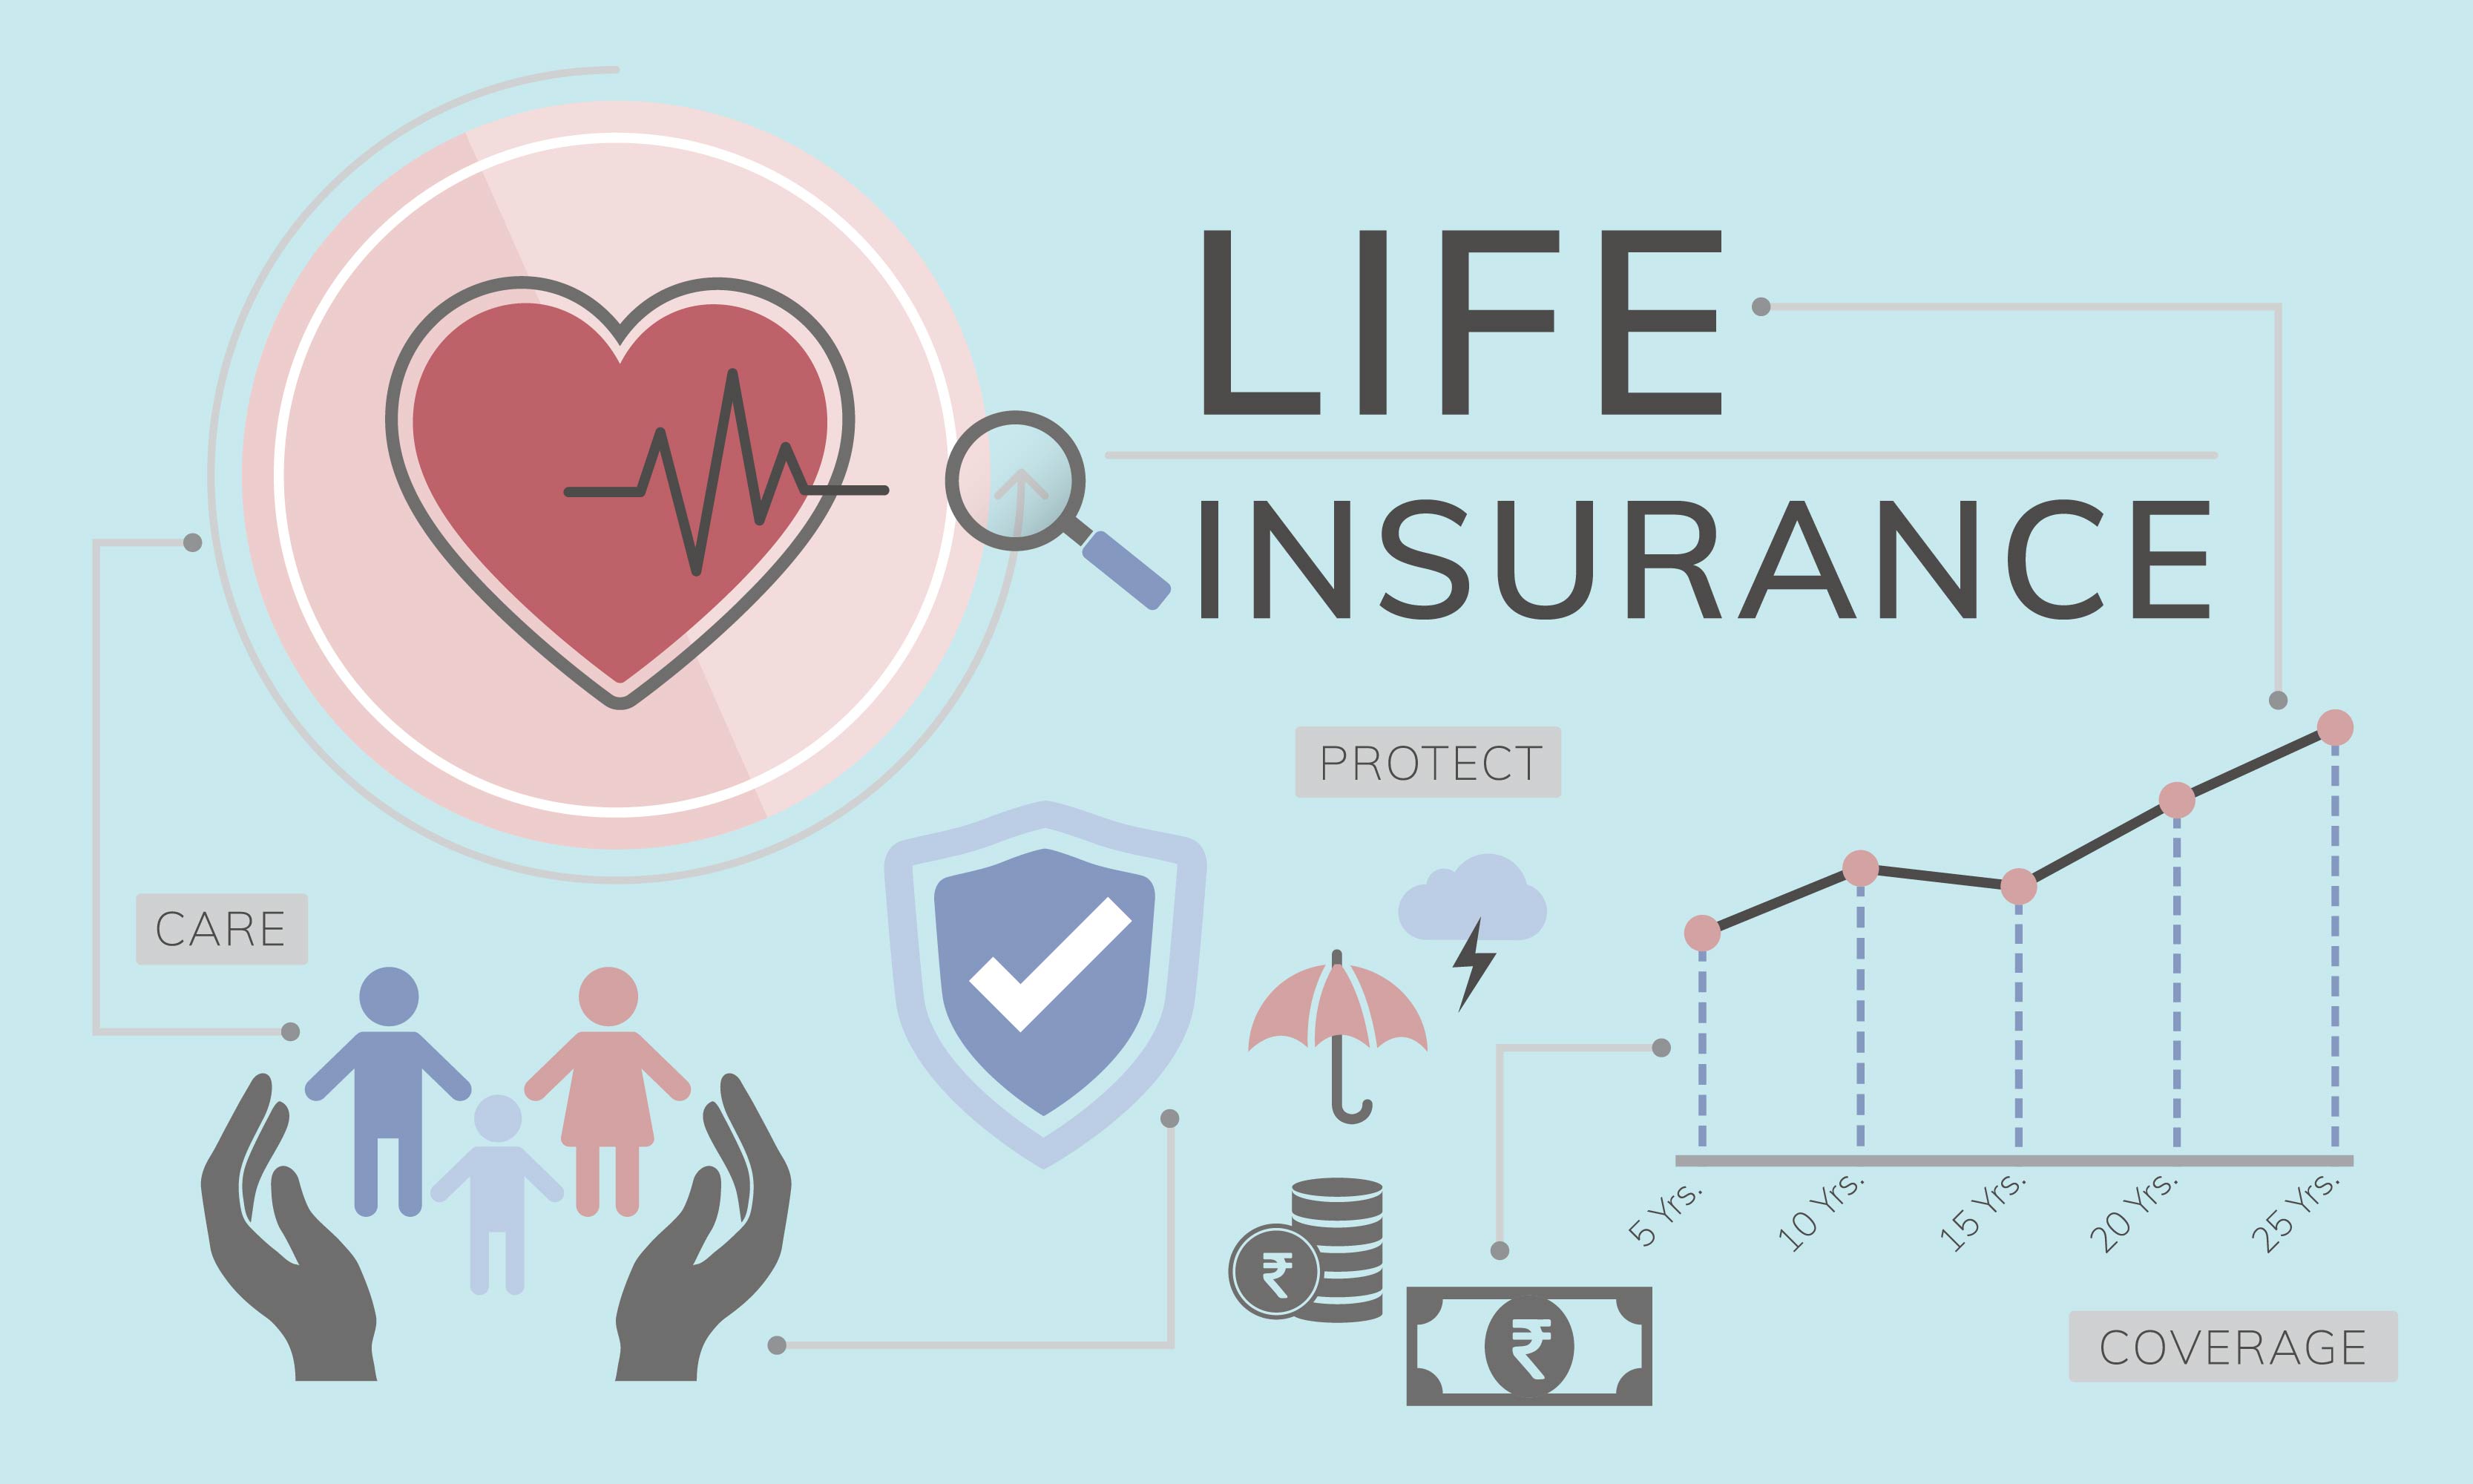 Can I Buy Life Insurance as an Investment?